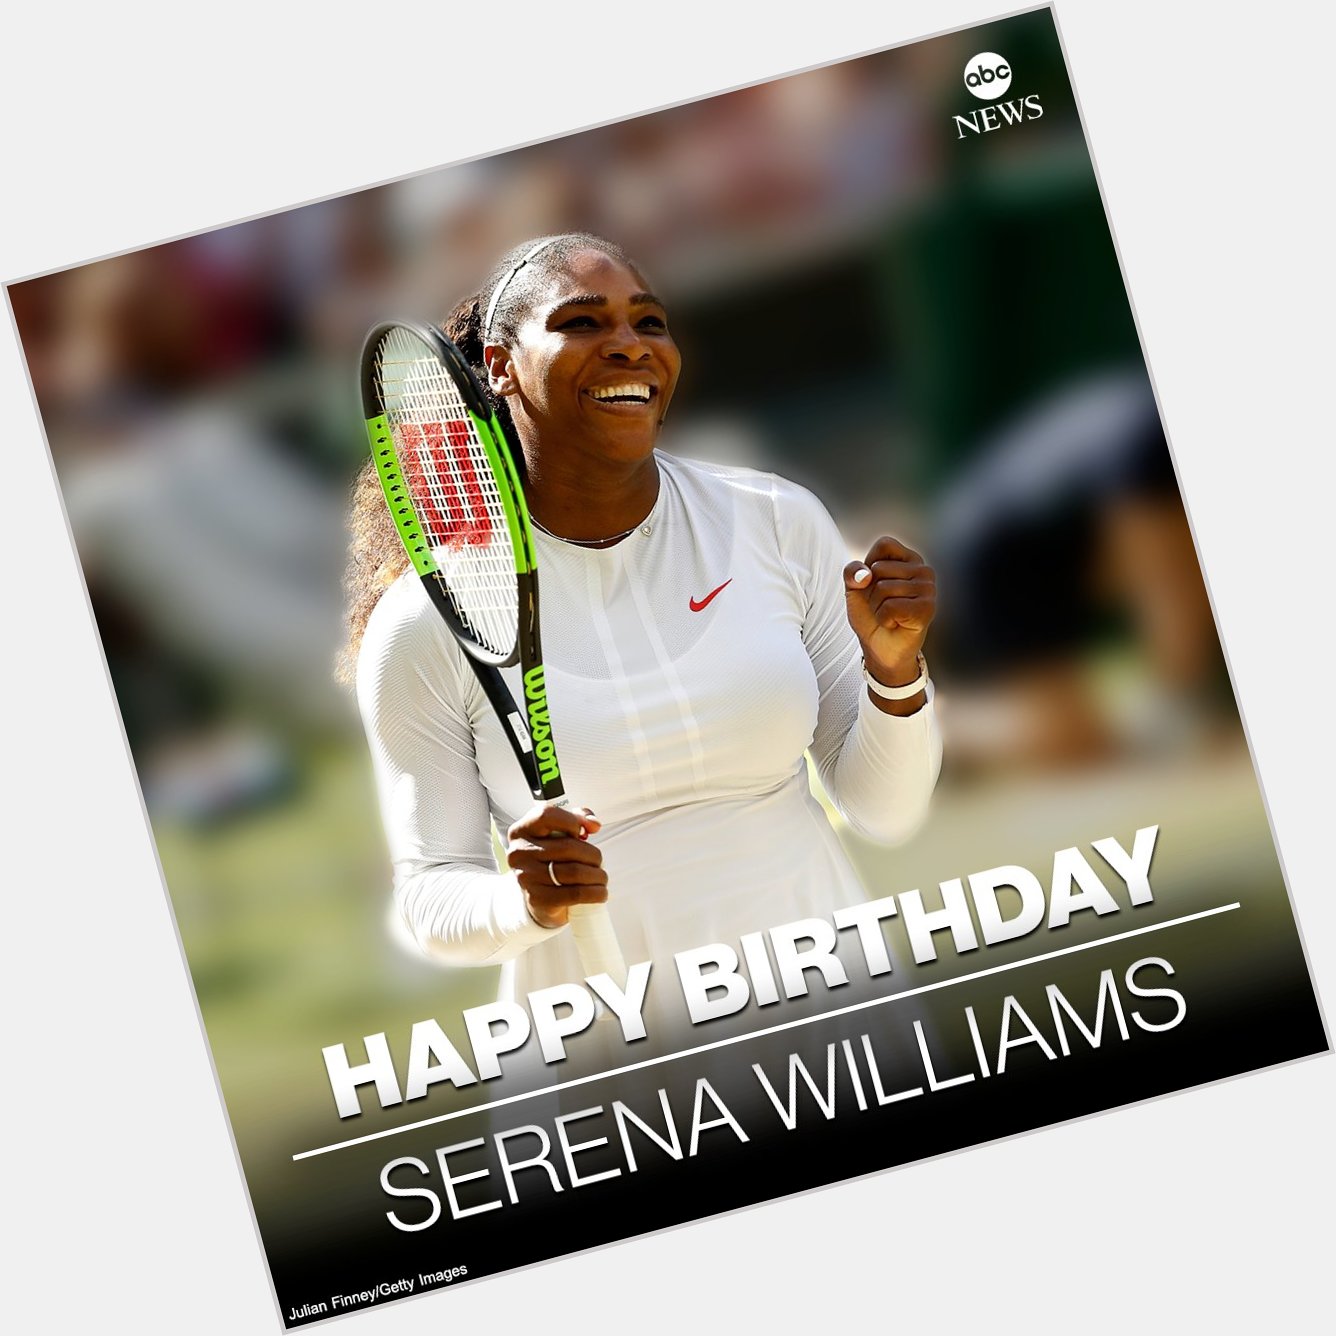 HAPPY BIRTHDAY: Tennis player Serena Williams is 40 today.  